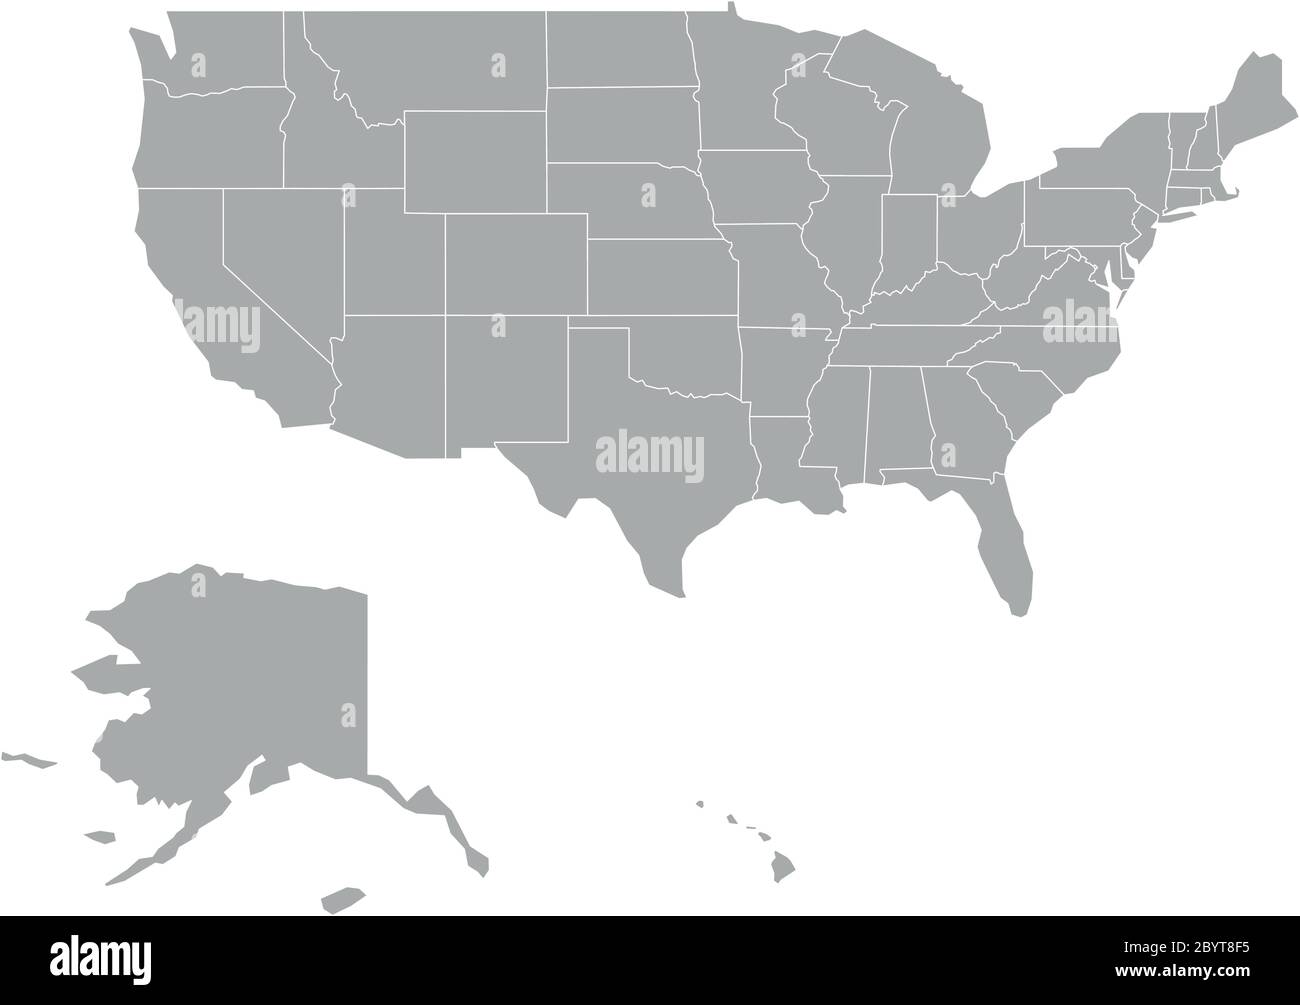 Blank map of United States of America - USA. Simplified dark grey silhouette vector map on white background. Stock Vector